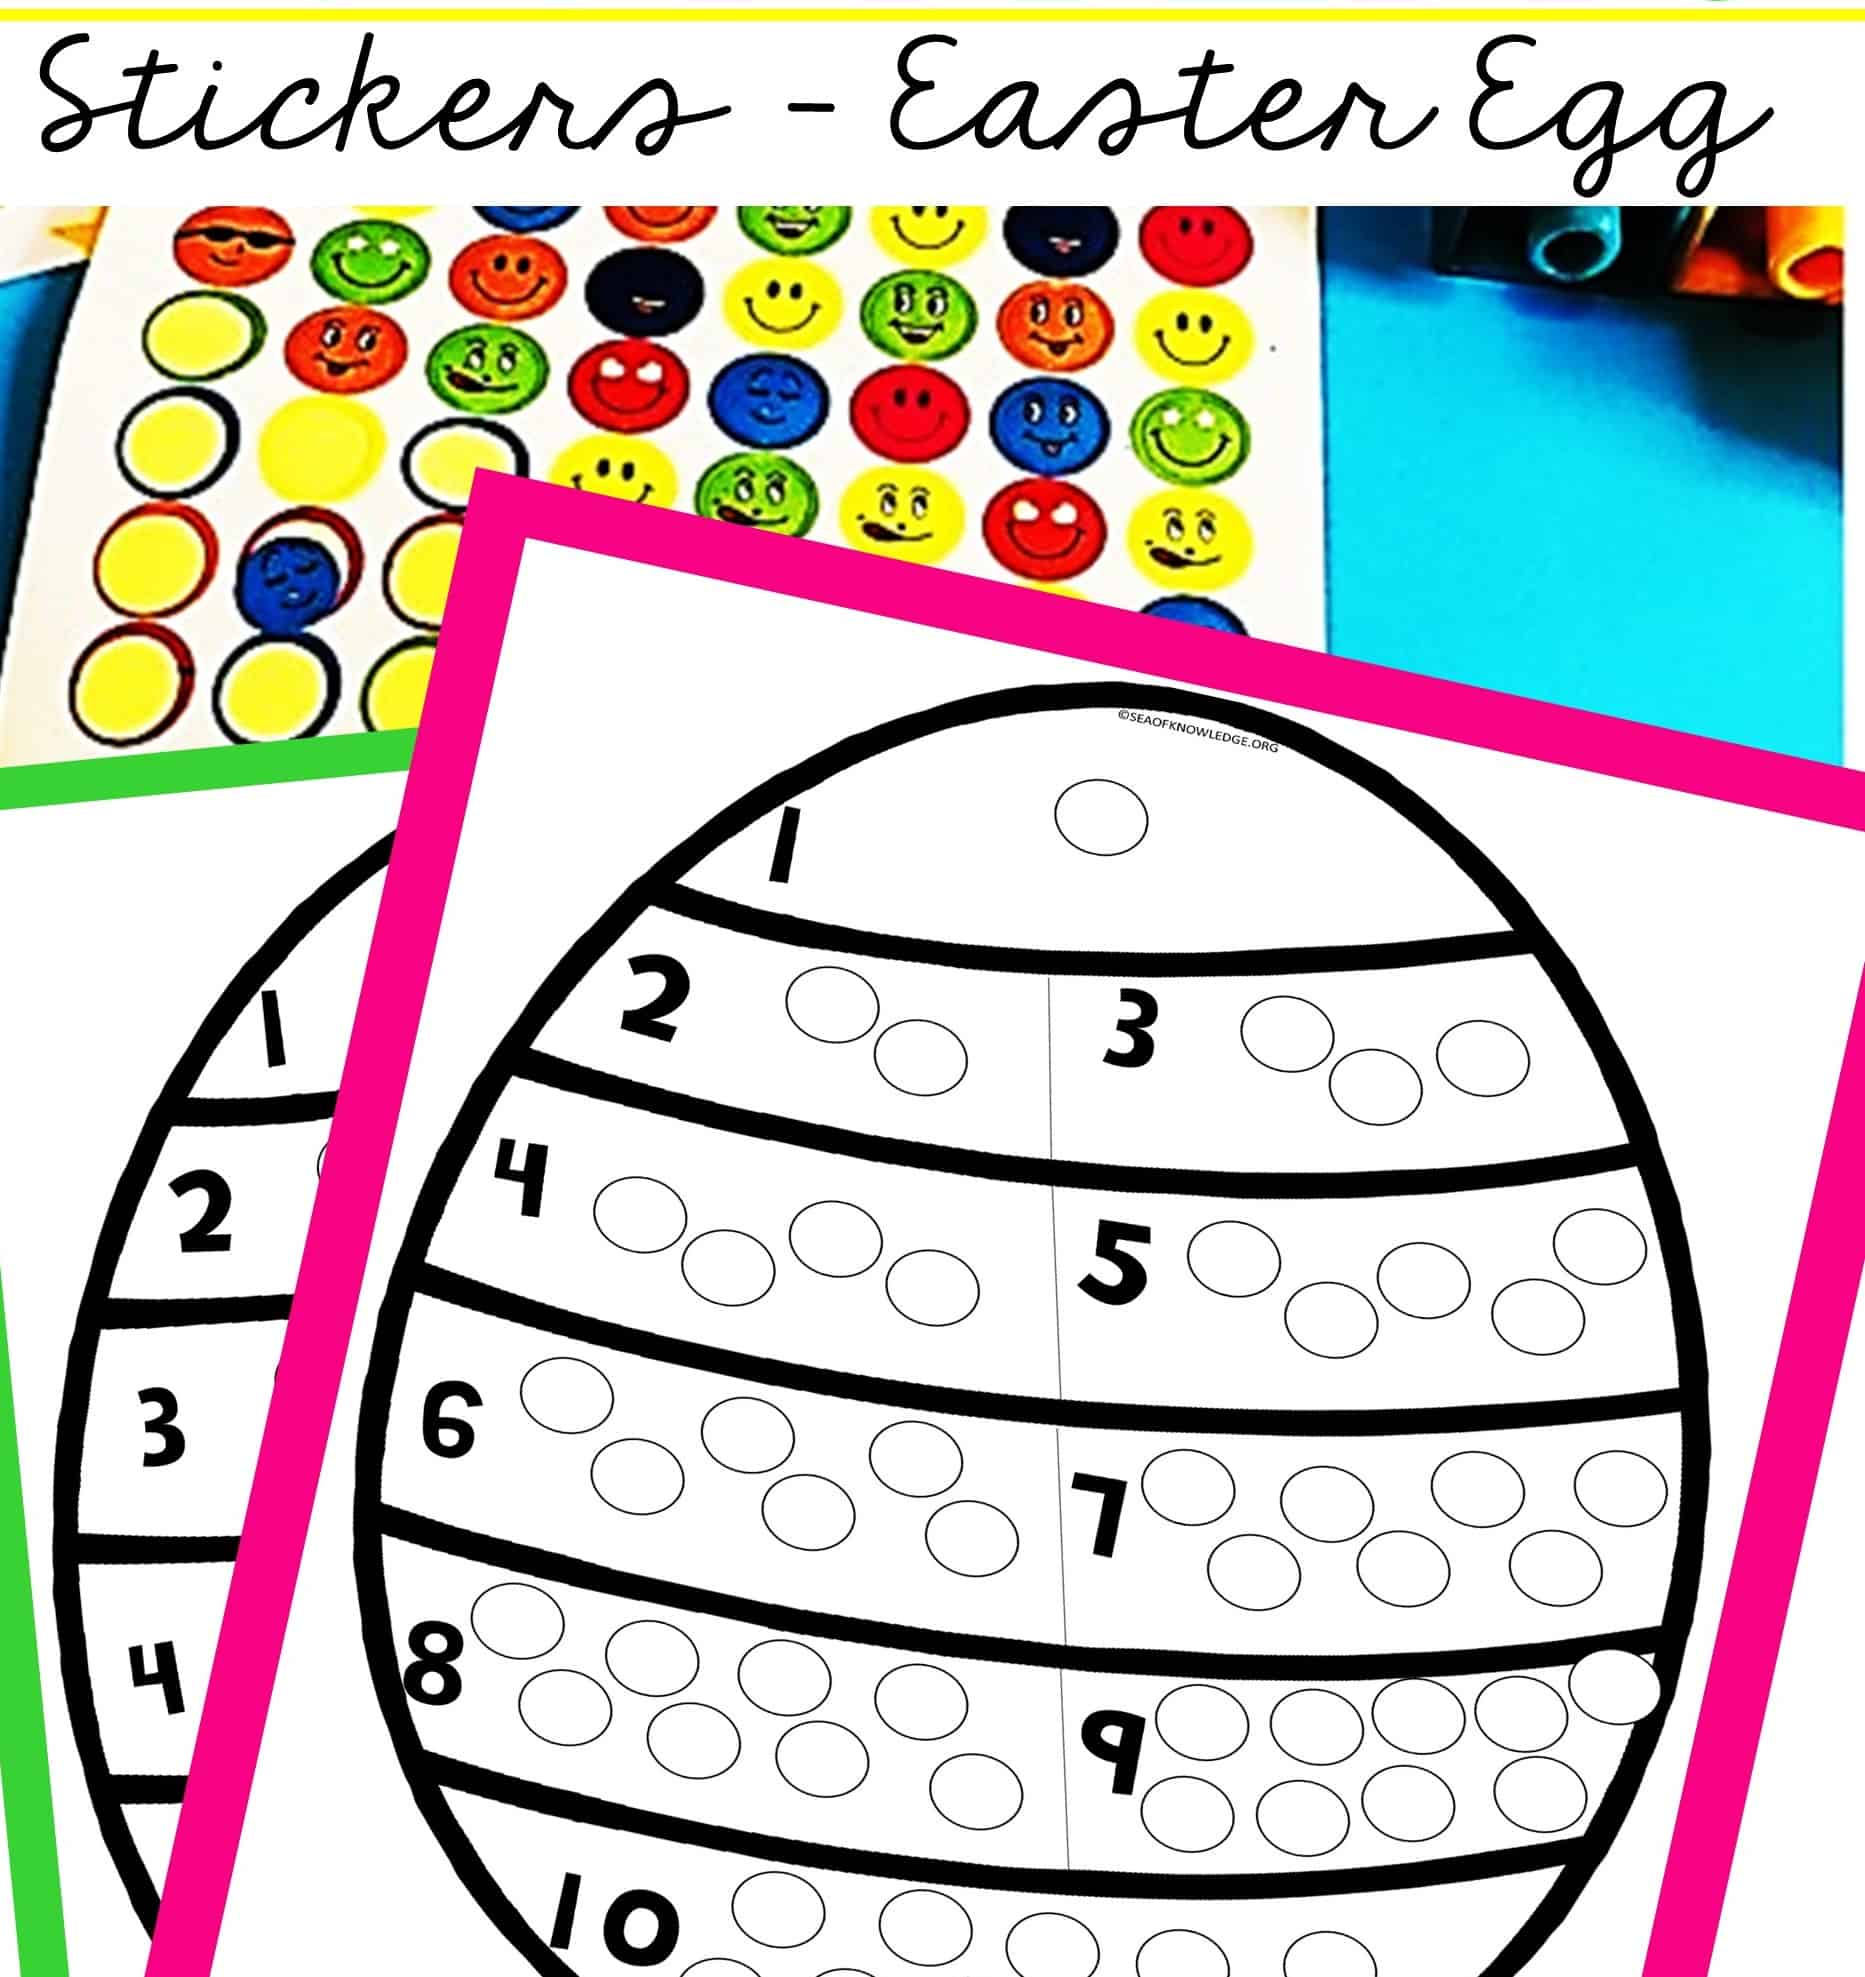 This Counting 1 to 10 Dot Stickers Easter Eggs activity will sure be a hit with your little learners! Looking for a fun way to get kids to count and show their numbers? These fun Easter egg themed printable cards are perfect for that. Learners will identify the number on each section and then place that many dot stickers to fill the 'dots on their Easter eggs to decorate them'.